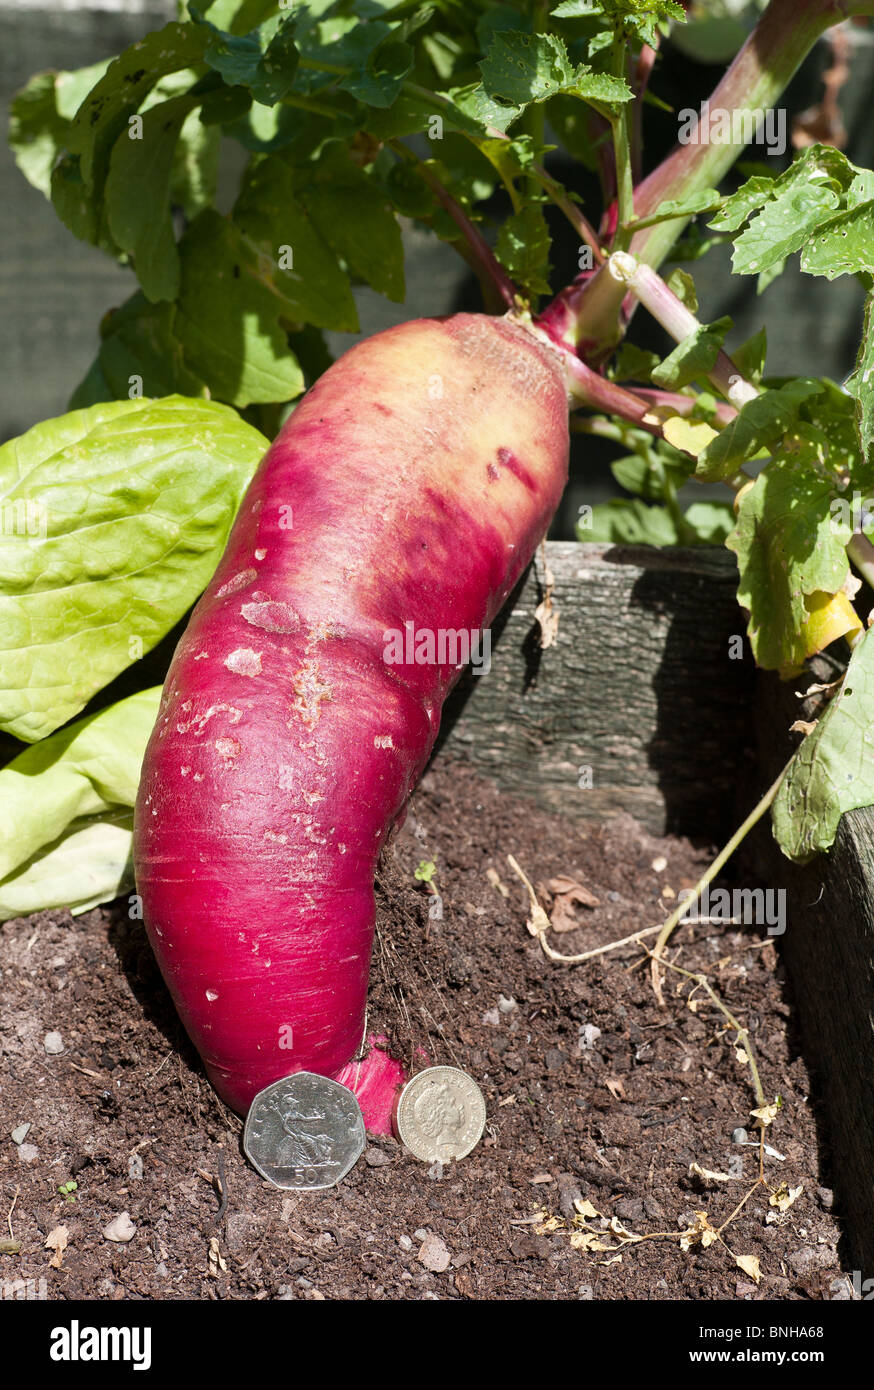 Giant radish growing in raised bed with English coins to suggest size and scale Stock Photo